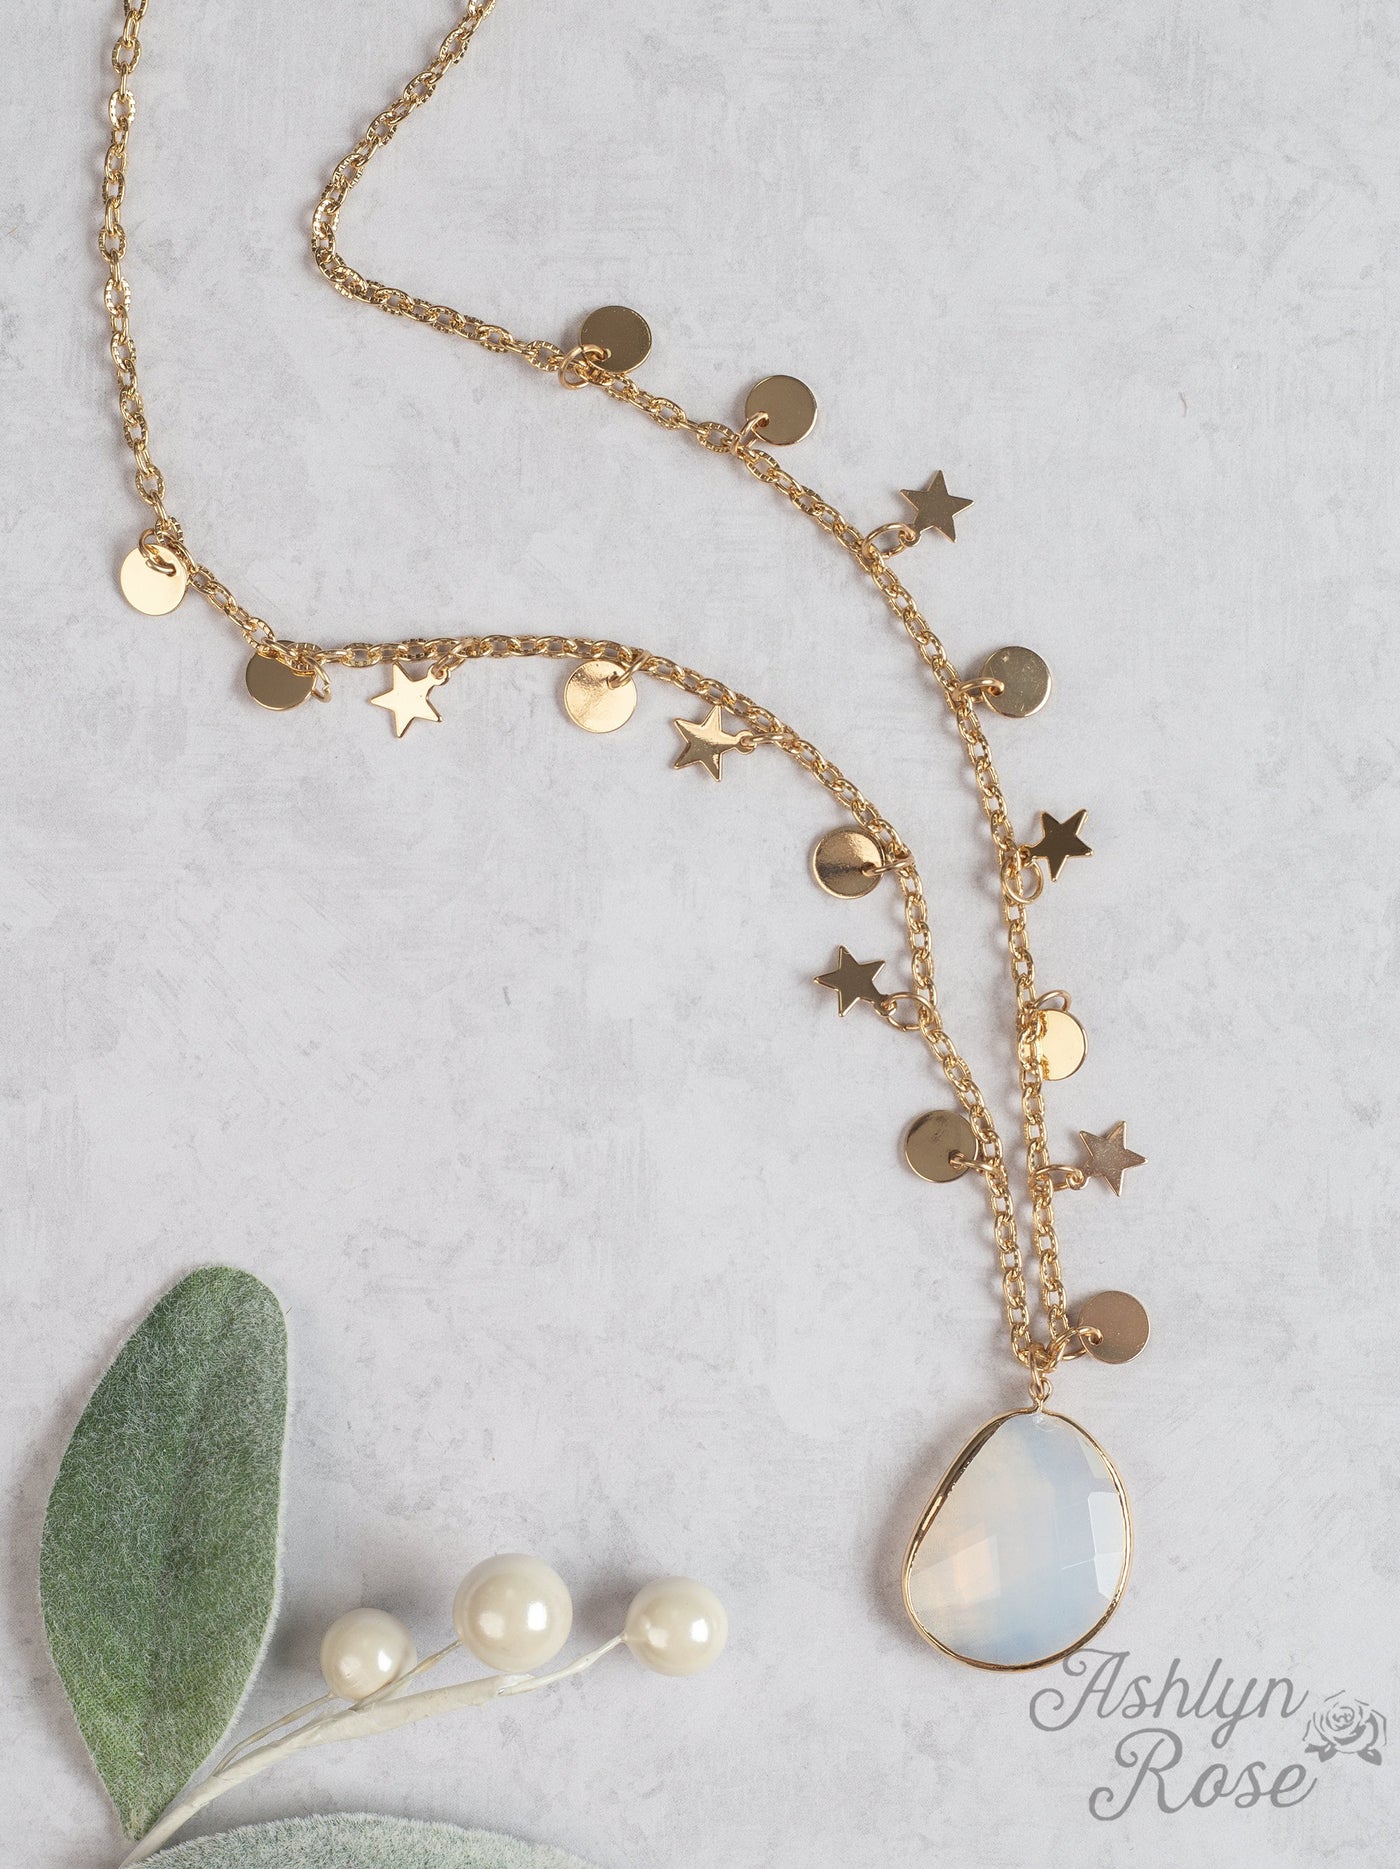 Making a Statement Gold Chain with Gemstone